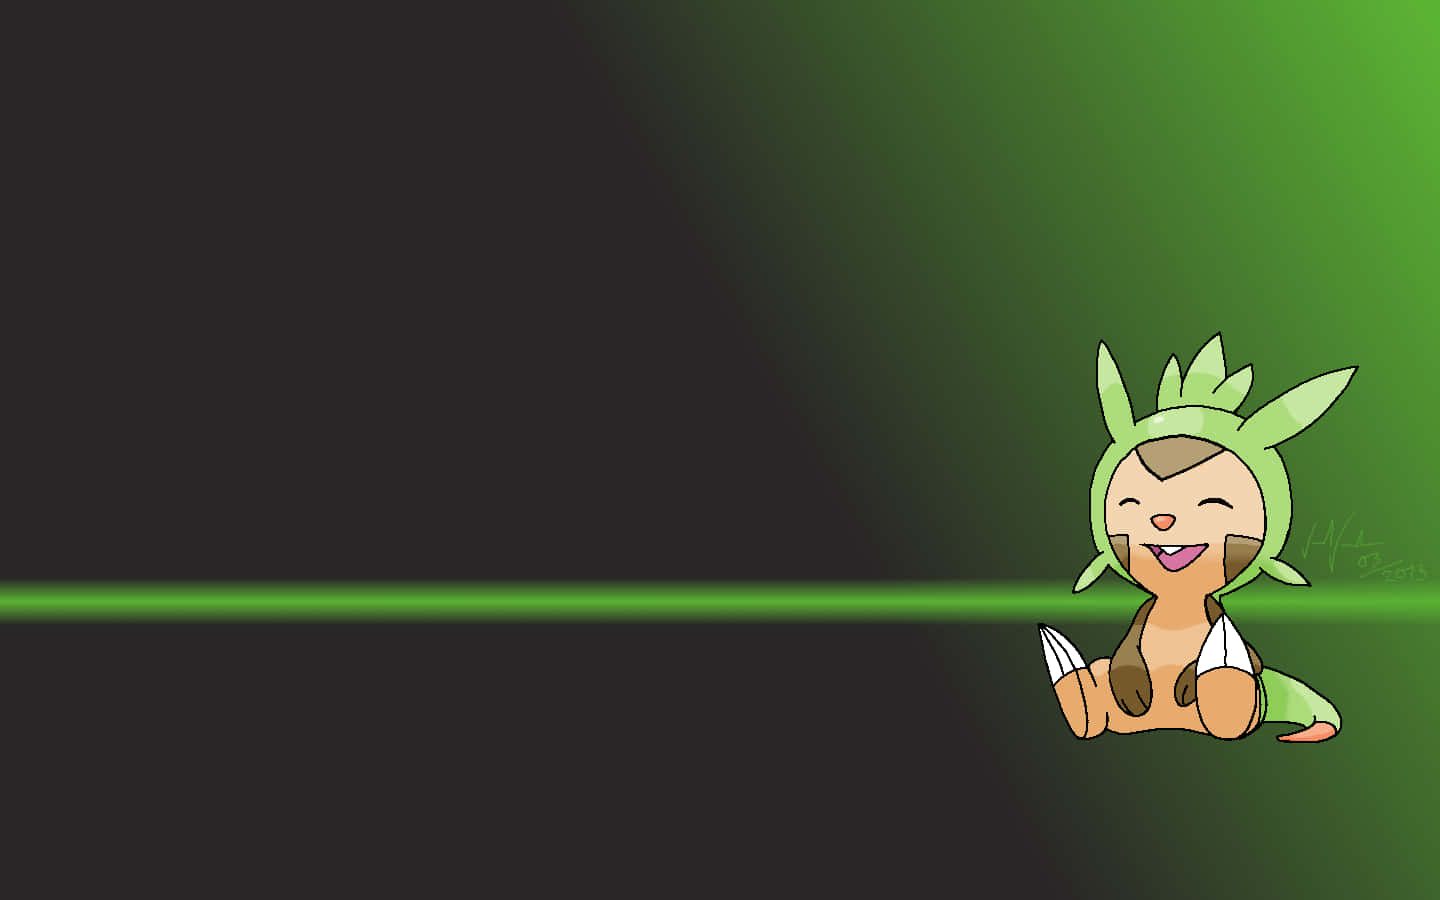 Caption: Adorable Chespin Smiling with Eyes Closed Wallpaper